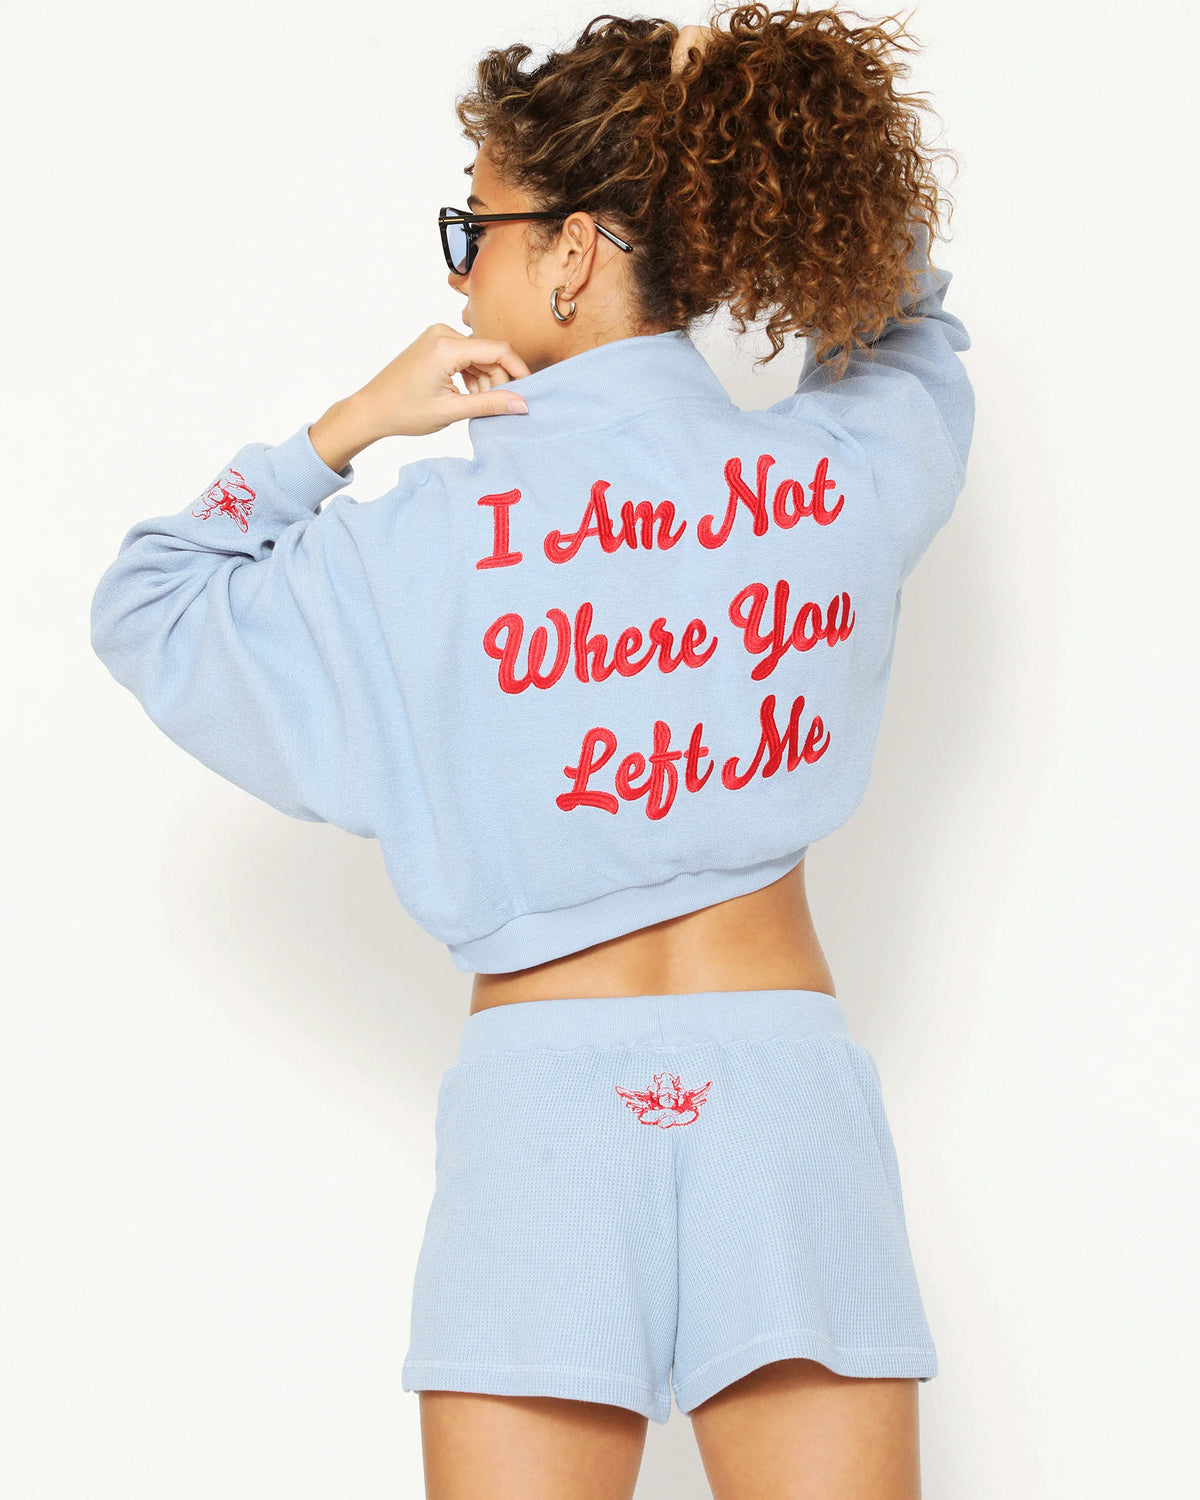 I Am Not Where You Left Me V2 Cropped Crewneck - ONFEMME By Lindsey's Kloset